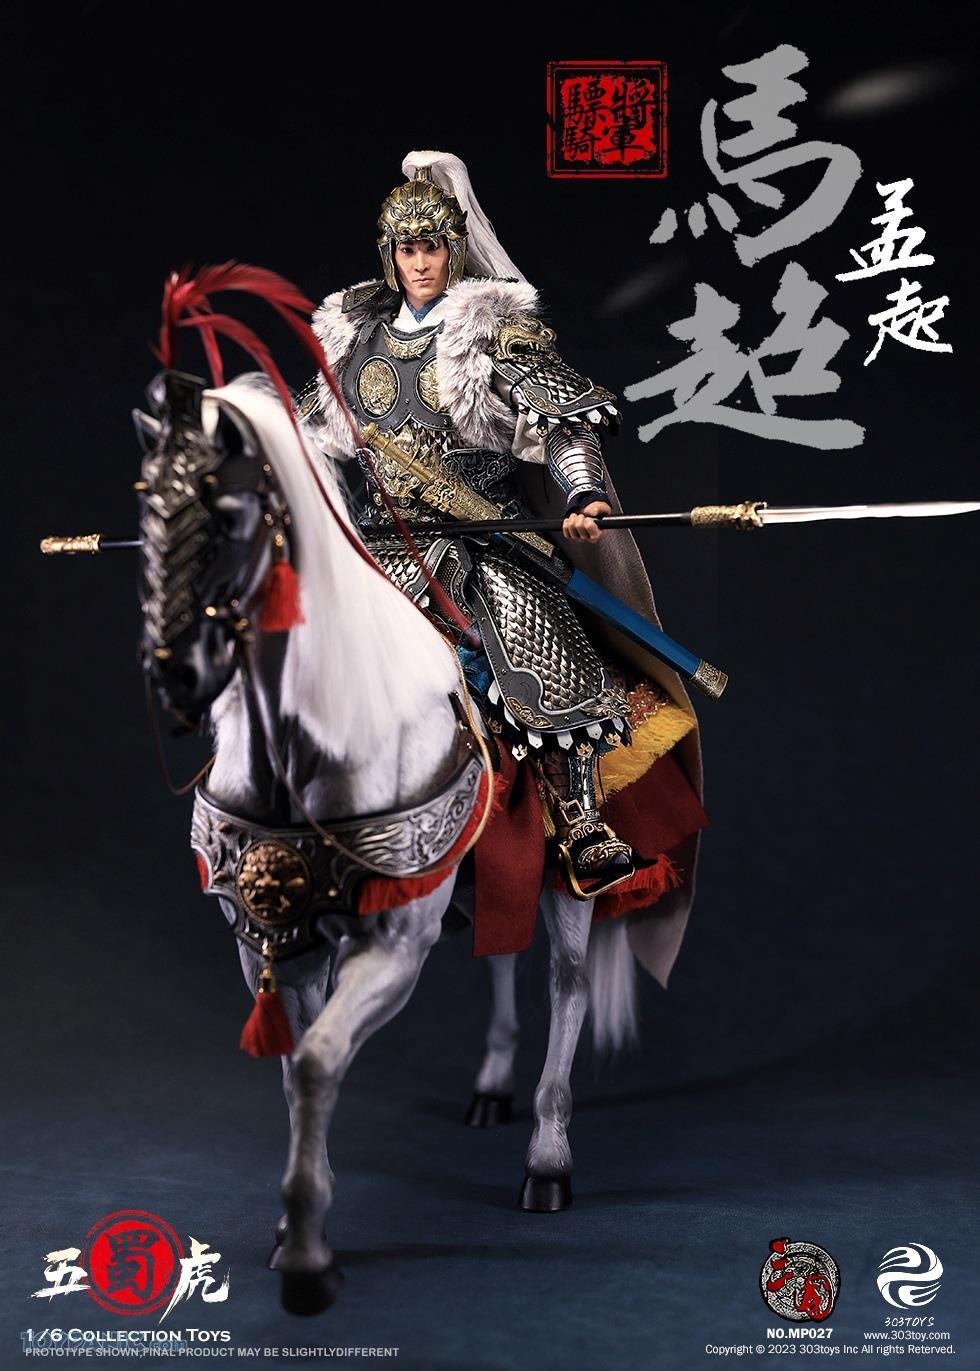 MaChao - NEW PRODUCT: 303TOYS: 1/6 Three Kingdoms Series - Hussar General Ma Chao - Mengqi Pure Copper Standard Edition/Deluxe Edition/Li Shafei War Horse/Helmet 28520237